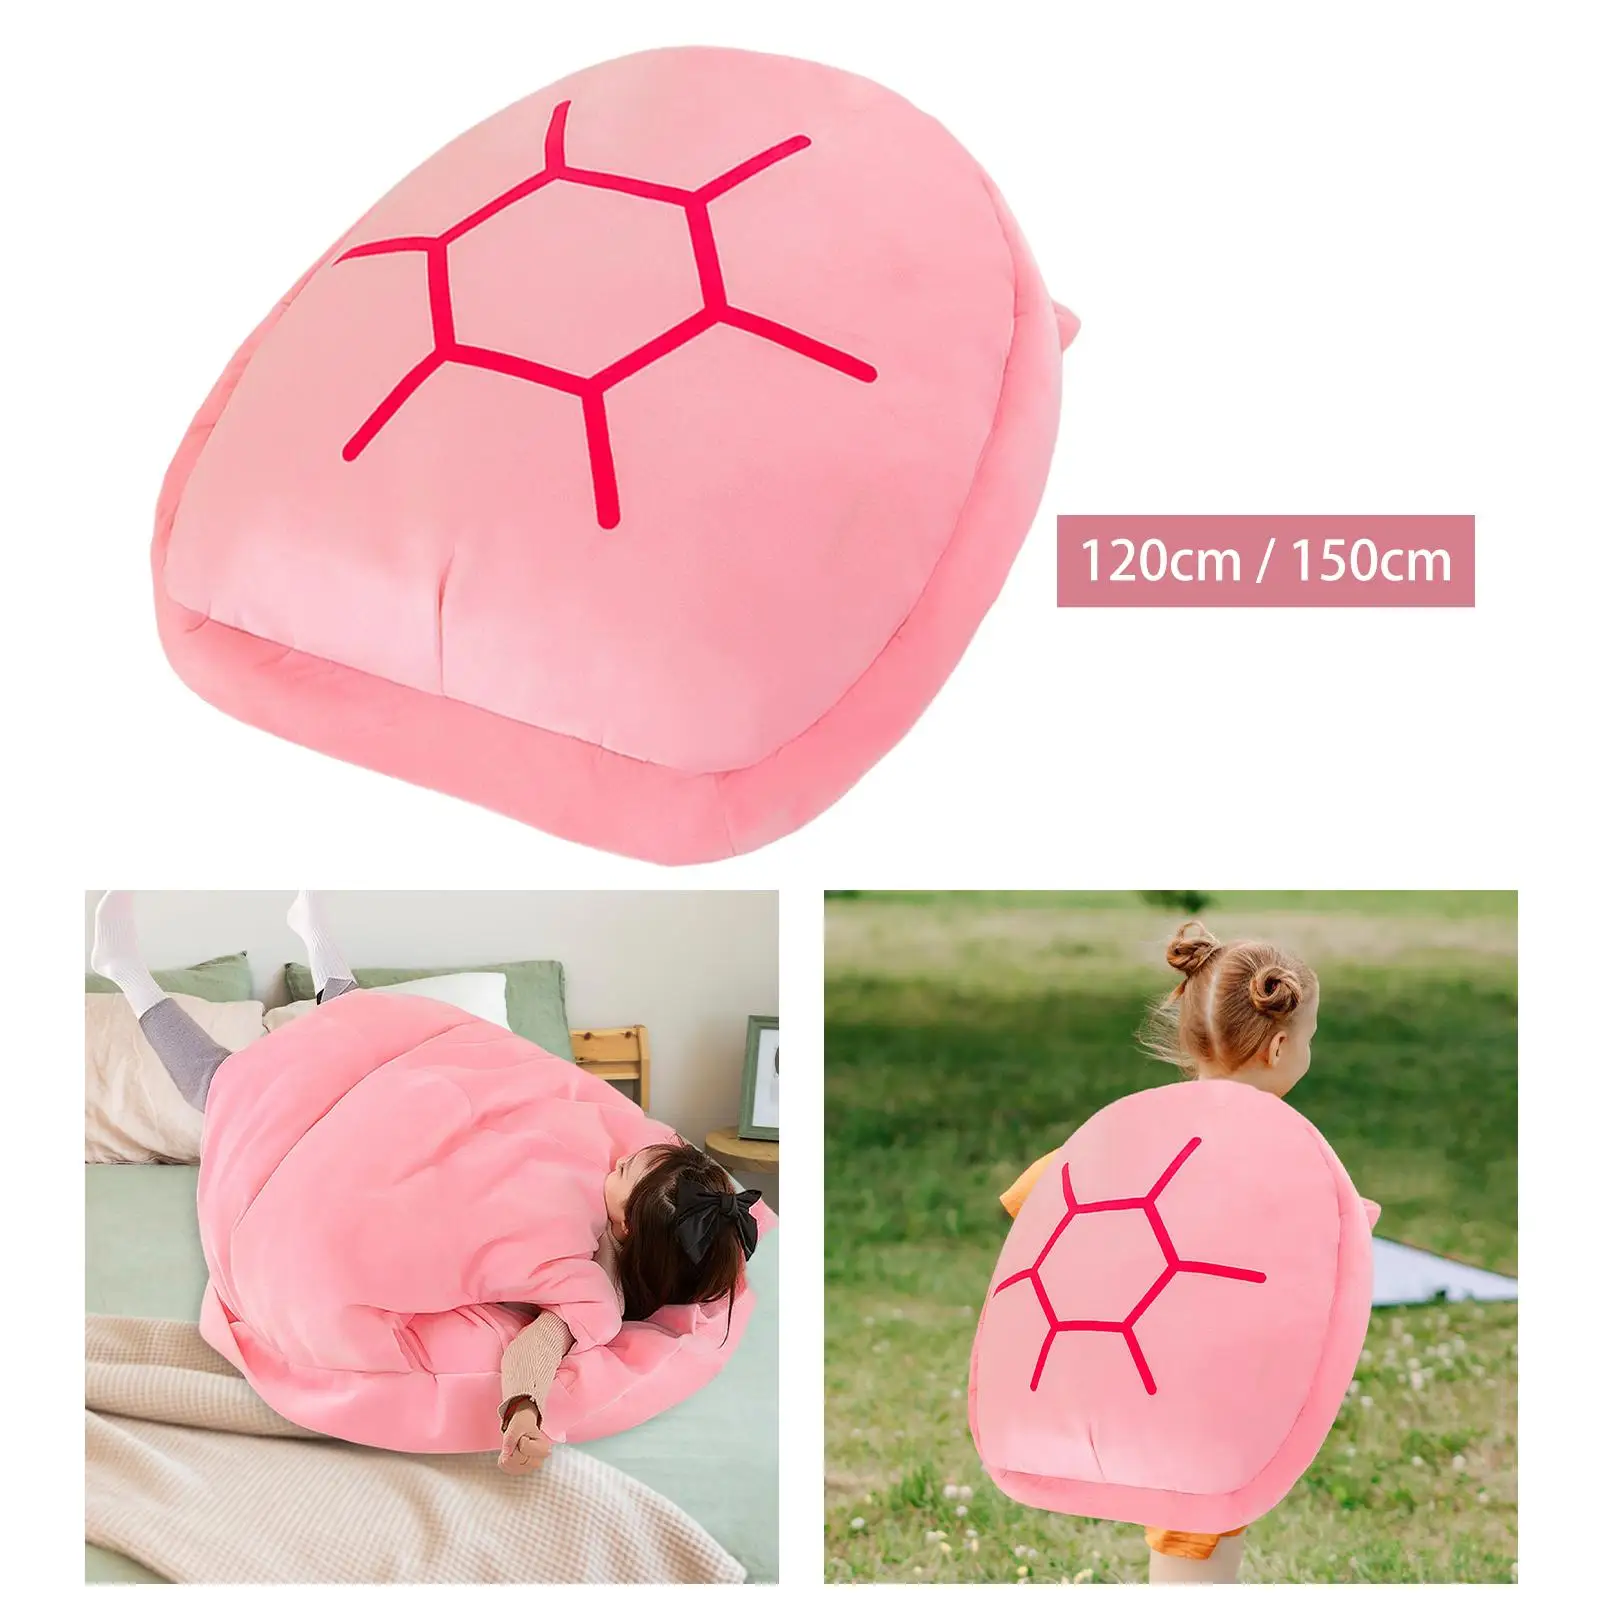 Creative Wearable Turtle Shell Funny Dress up Stuffed Animal Sleeping Pillow for Living Room Decor Cosplay Role Playing Game